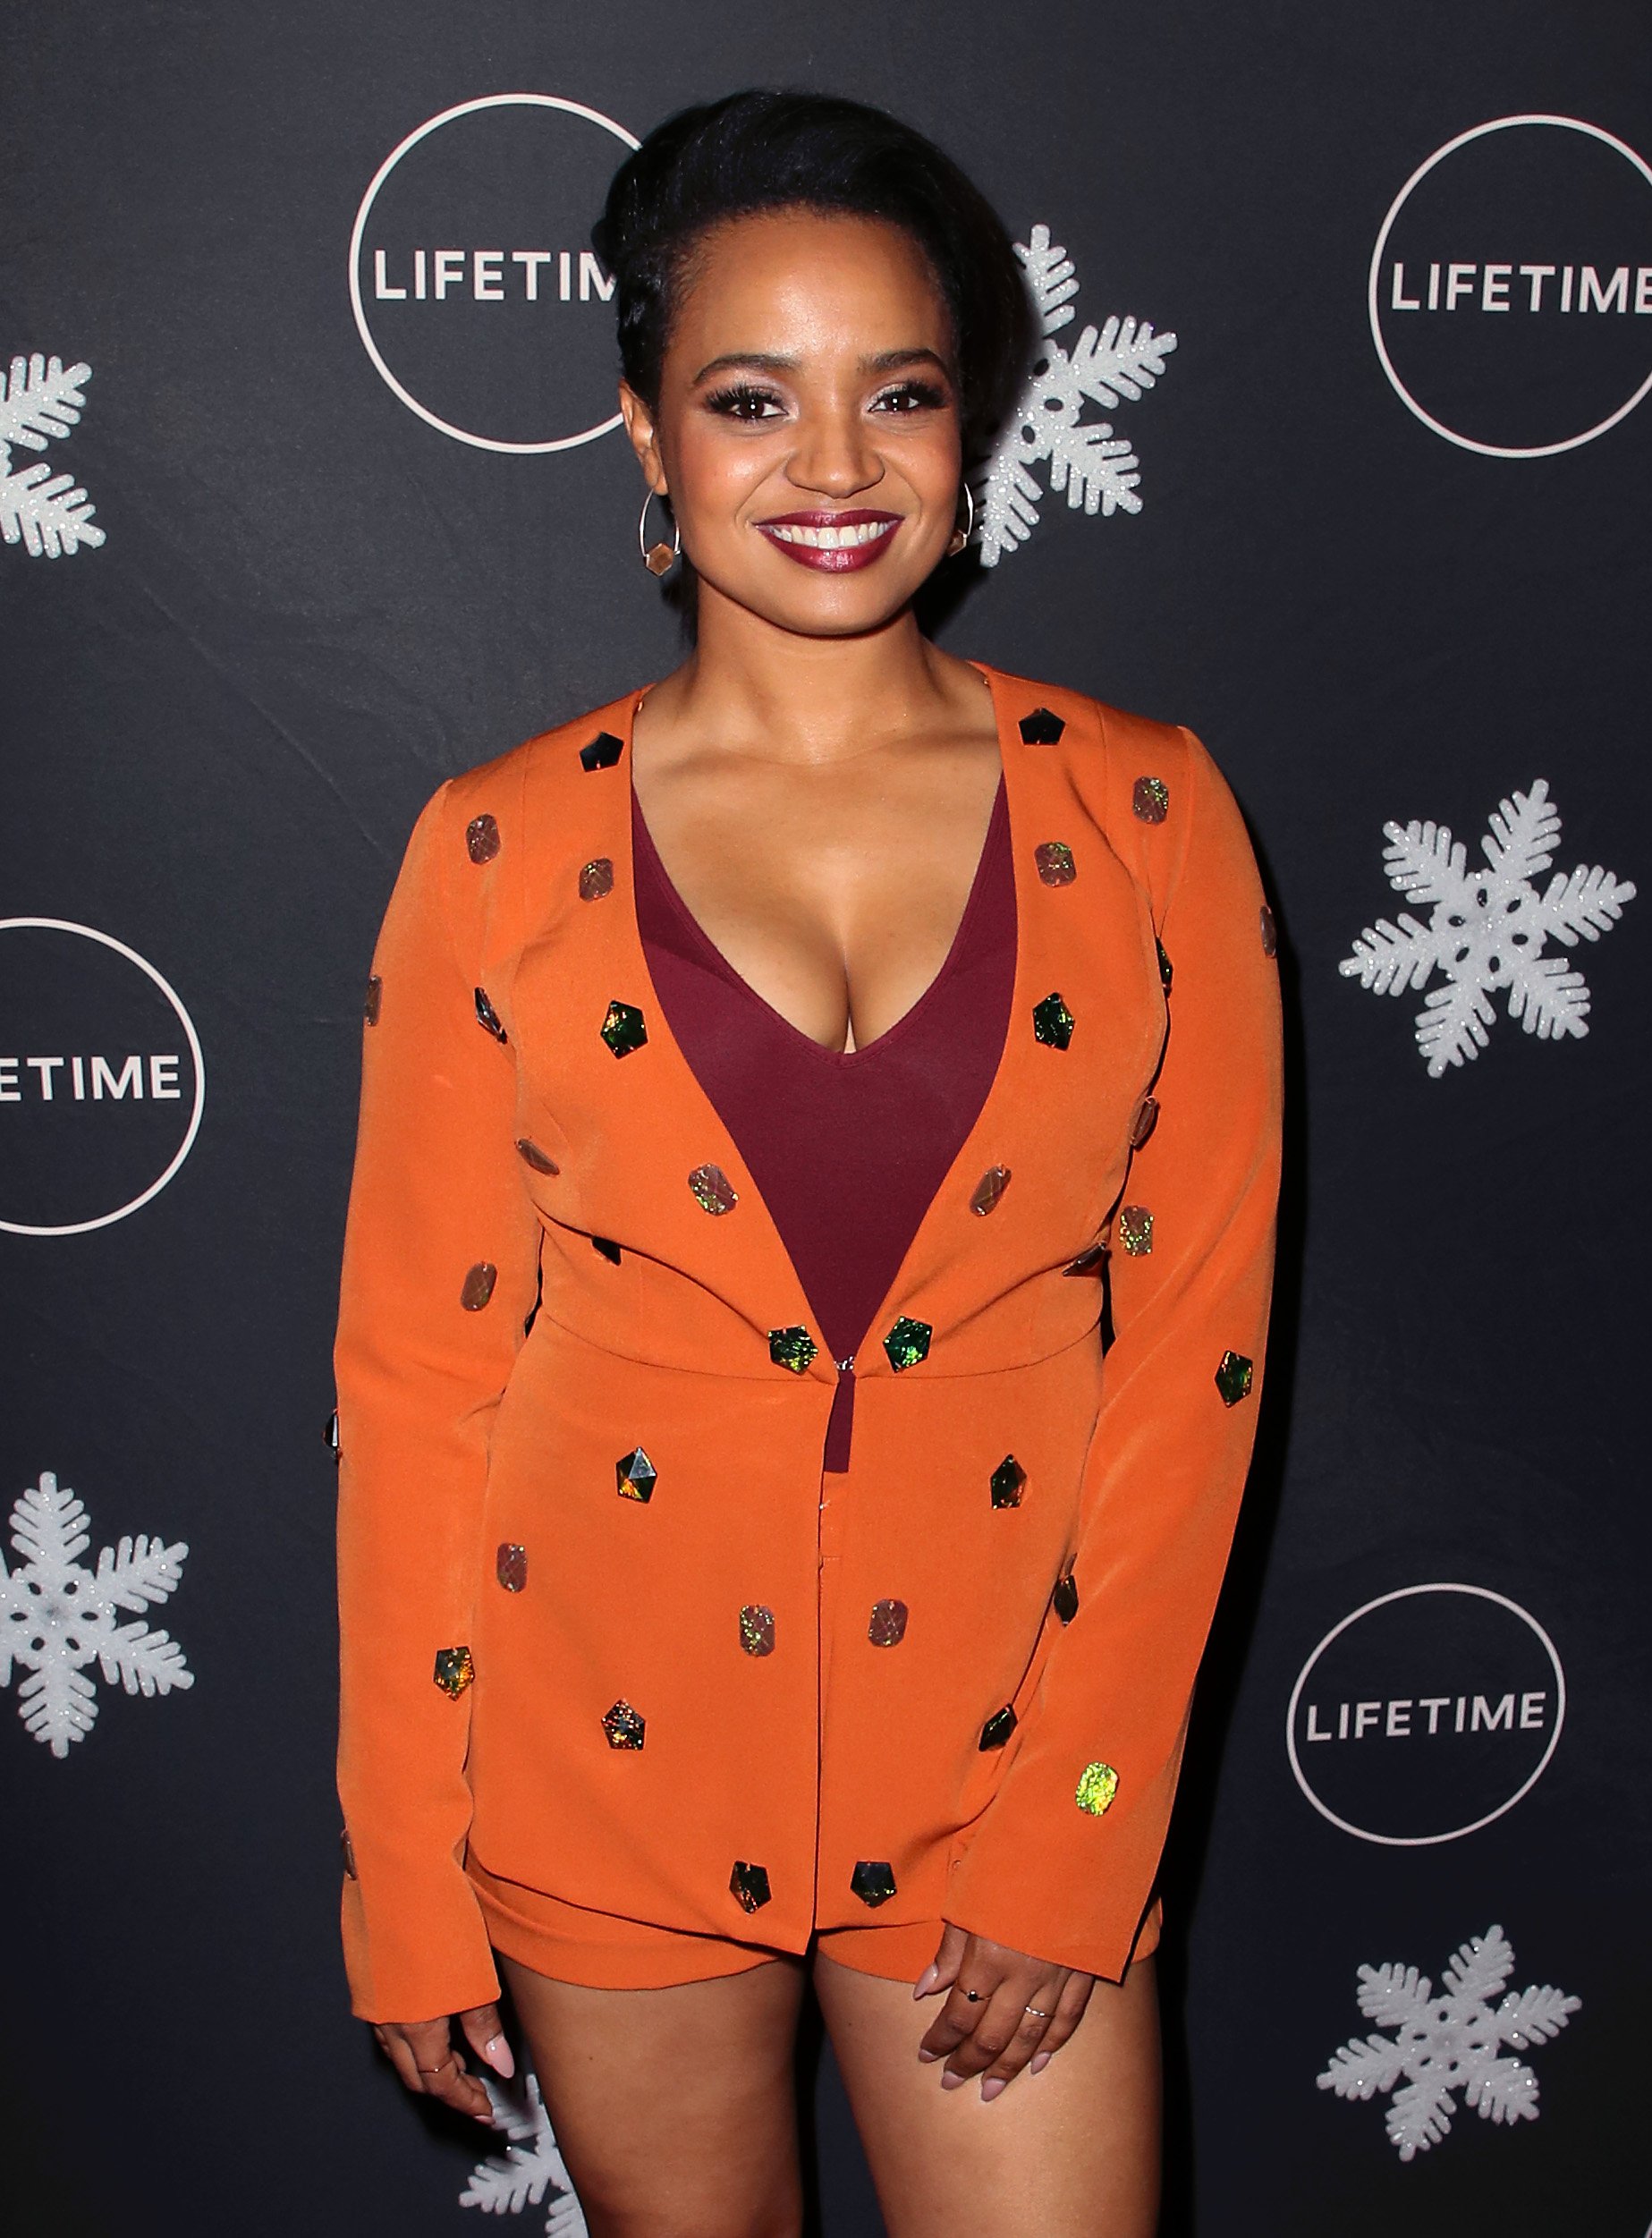 Kyla Pratt attends the "It's A Wonderful Lifetime" Holiday Party at STK Los Angeles on October 22, 2019. | Photo: Getty Images